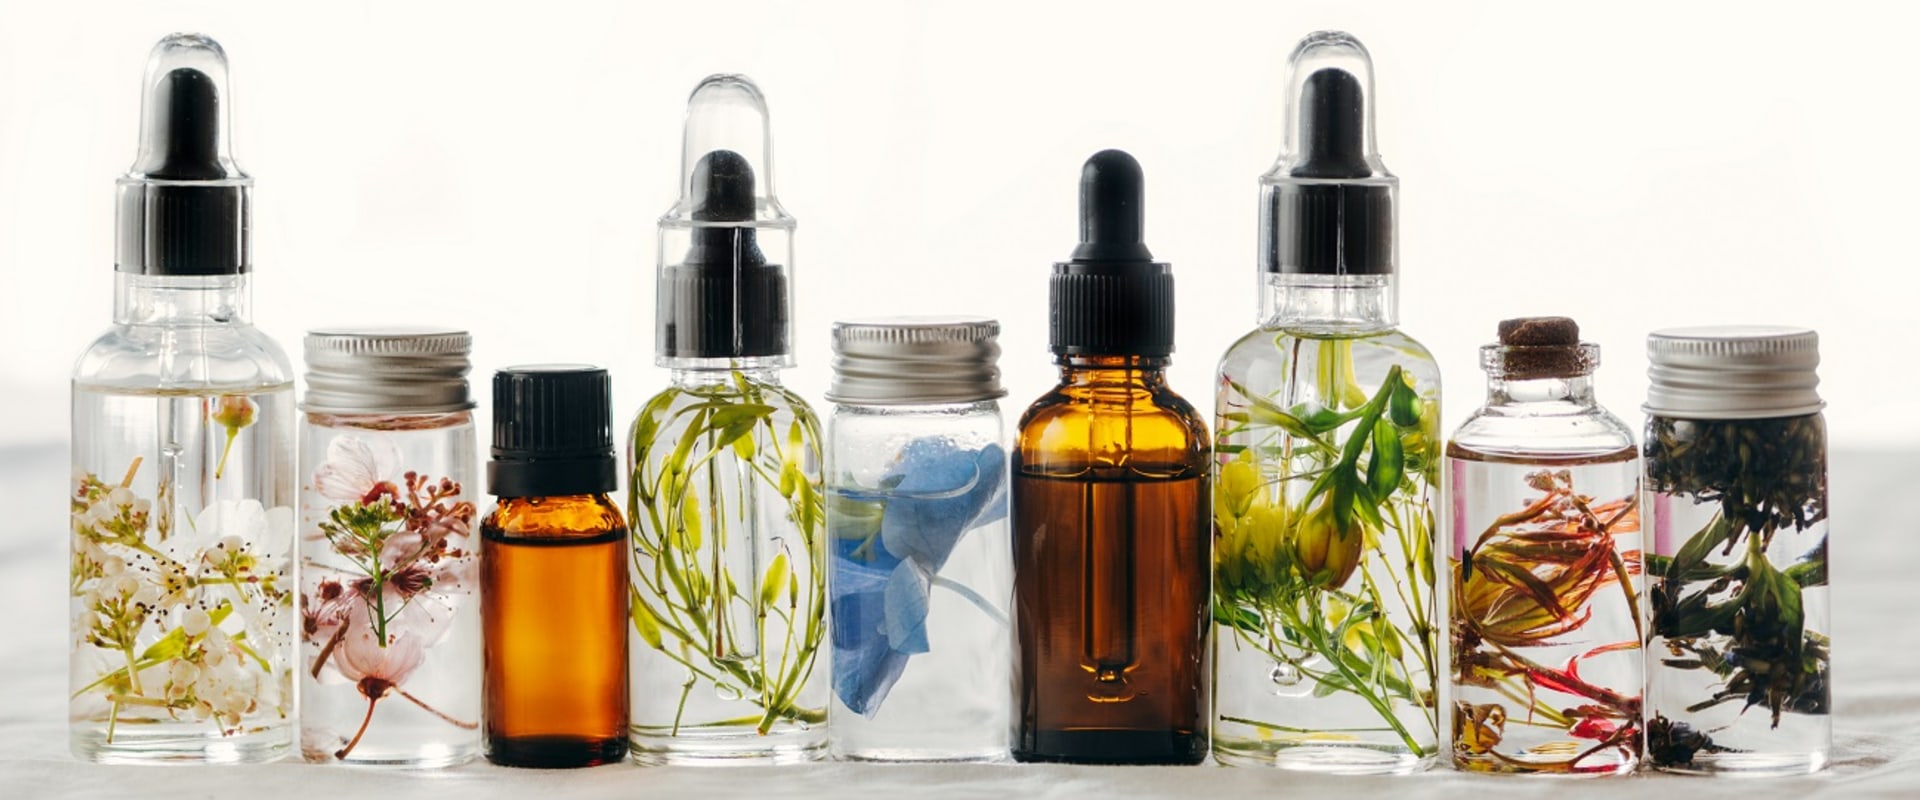 Selecting Essential Oils and Absolutes